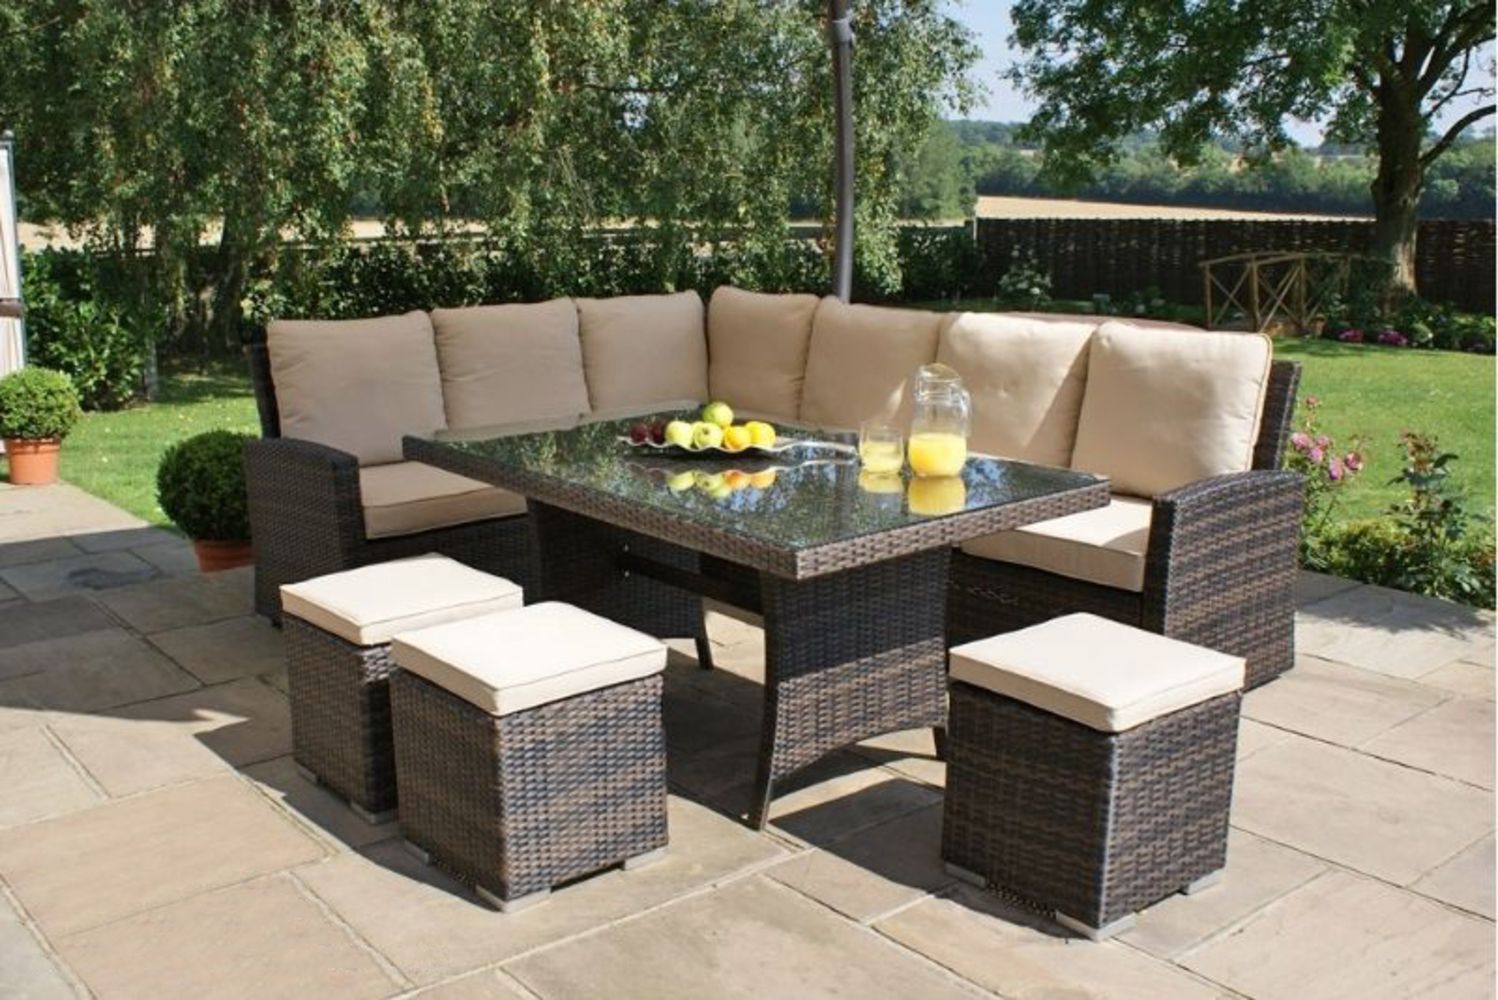 Brand New Rattan Furniture - Huge Discounts From Retail - Sunloungers, Dining Sets, Bar Tables, Corner Tables, Bistro Sets, Patio Heaters